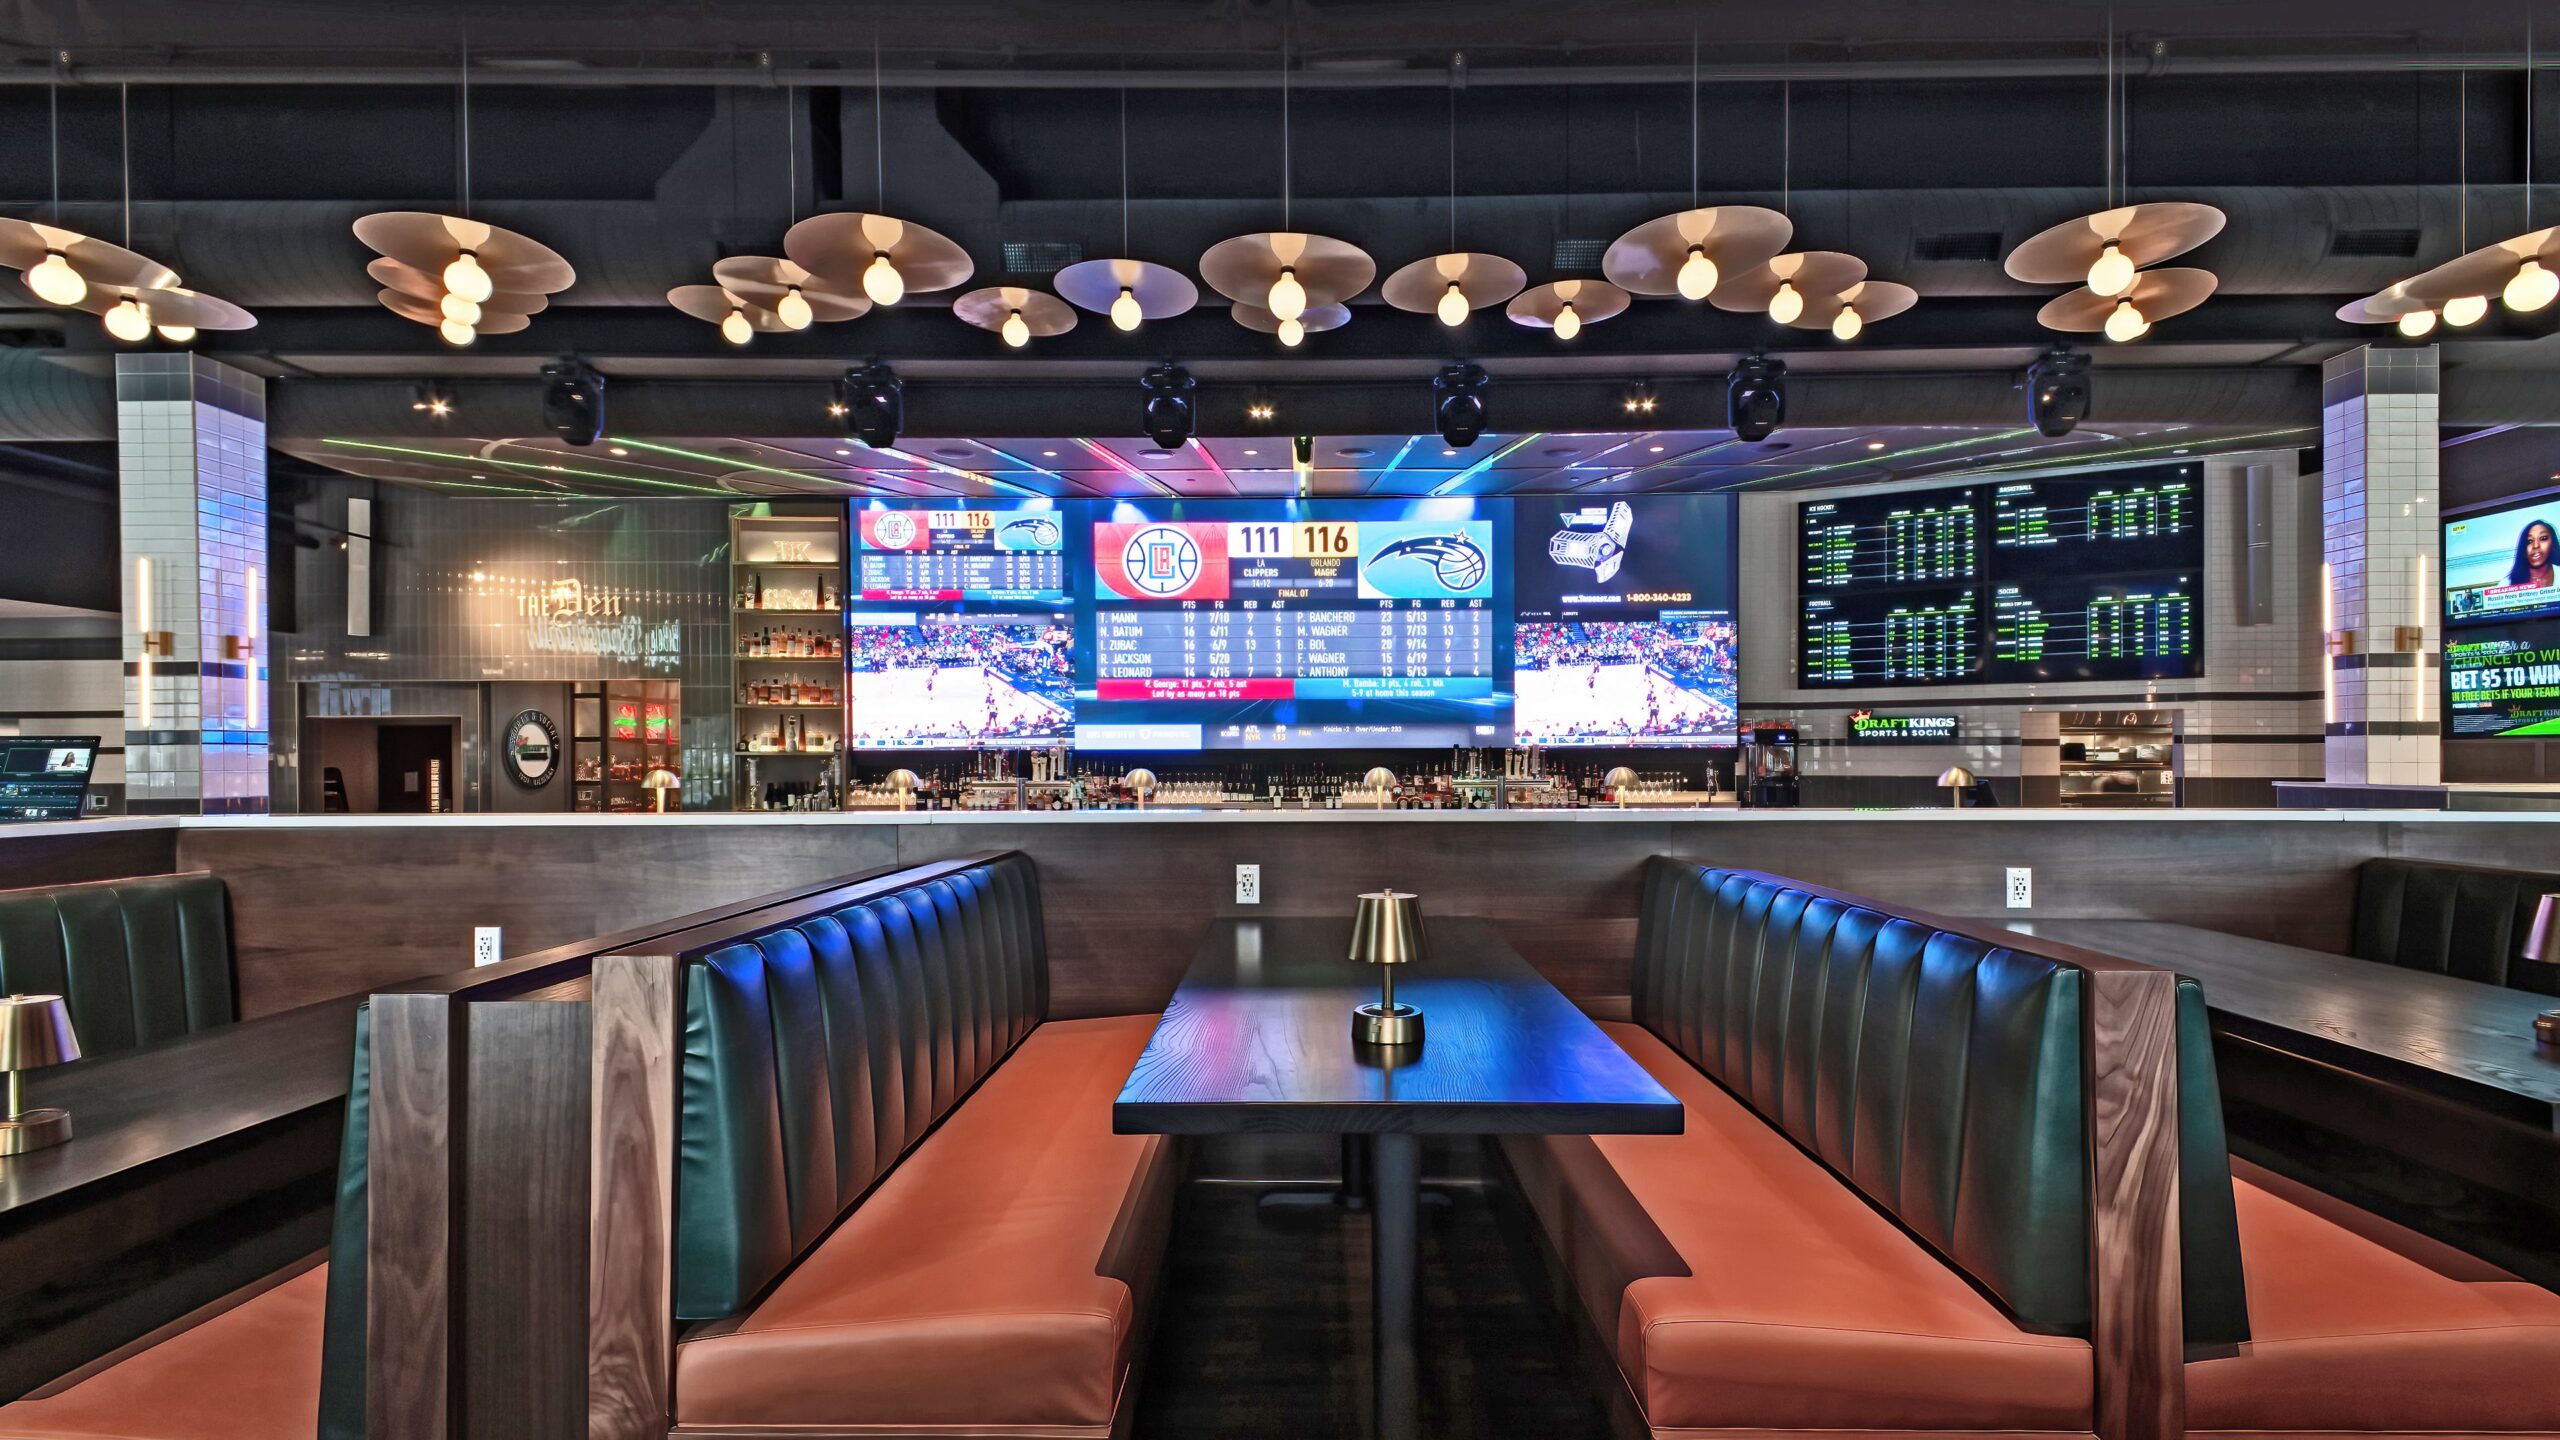 Draftkings Sports & Social rendering with full bar, TV screens, and booth seating.